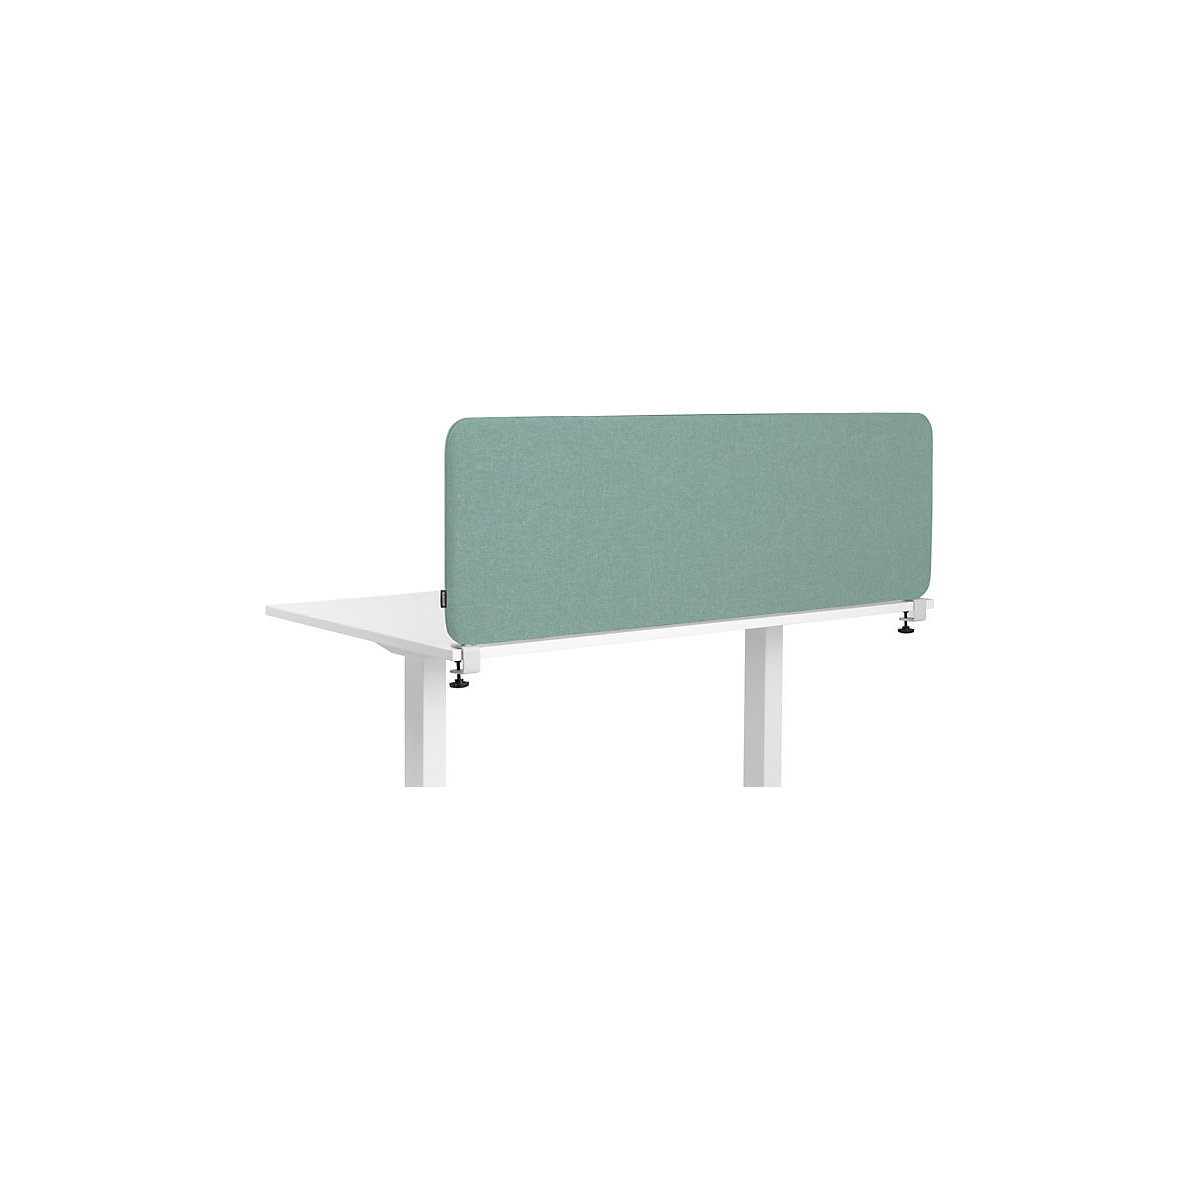 Softline Salsa acoustic desk partition, HxW 450 x 600 mm, fabric, green-1